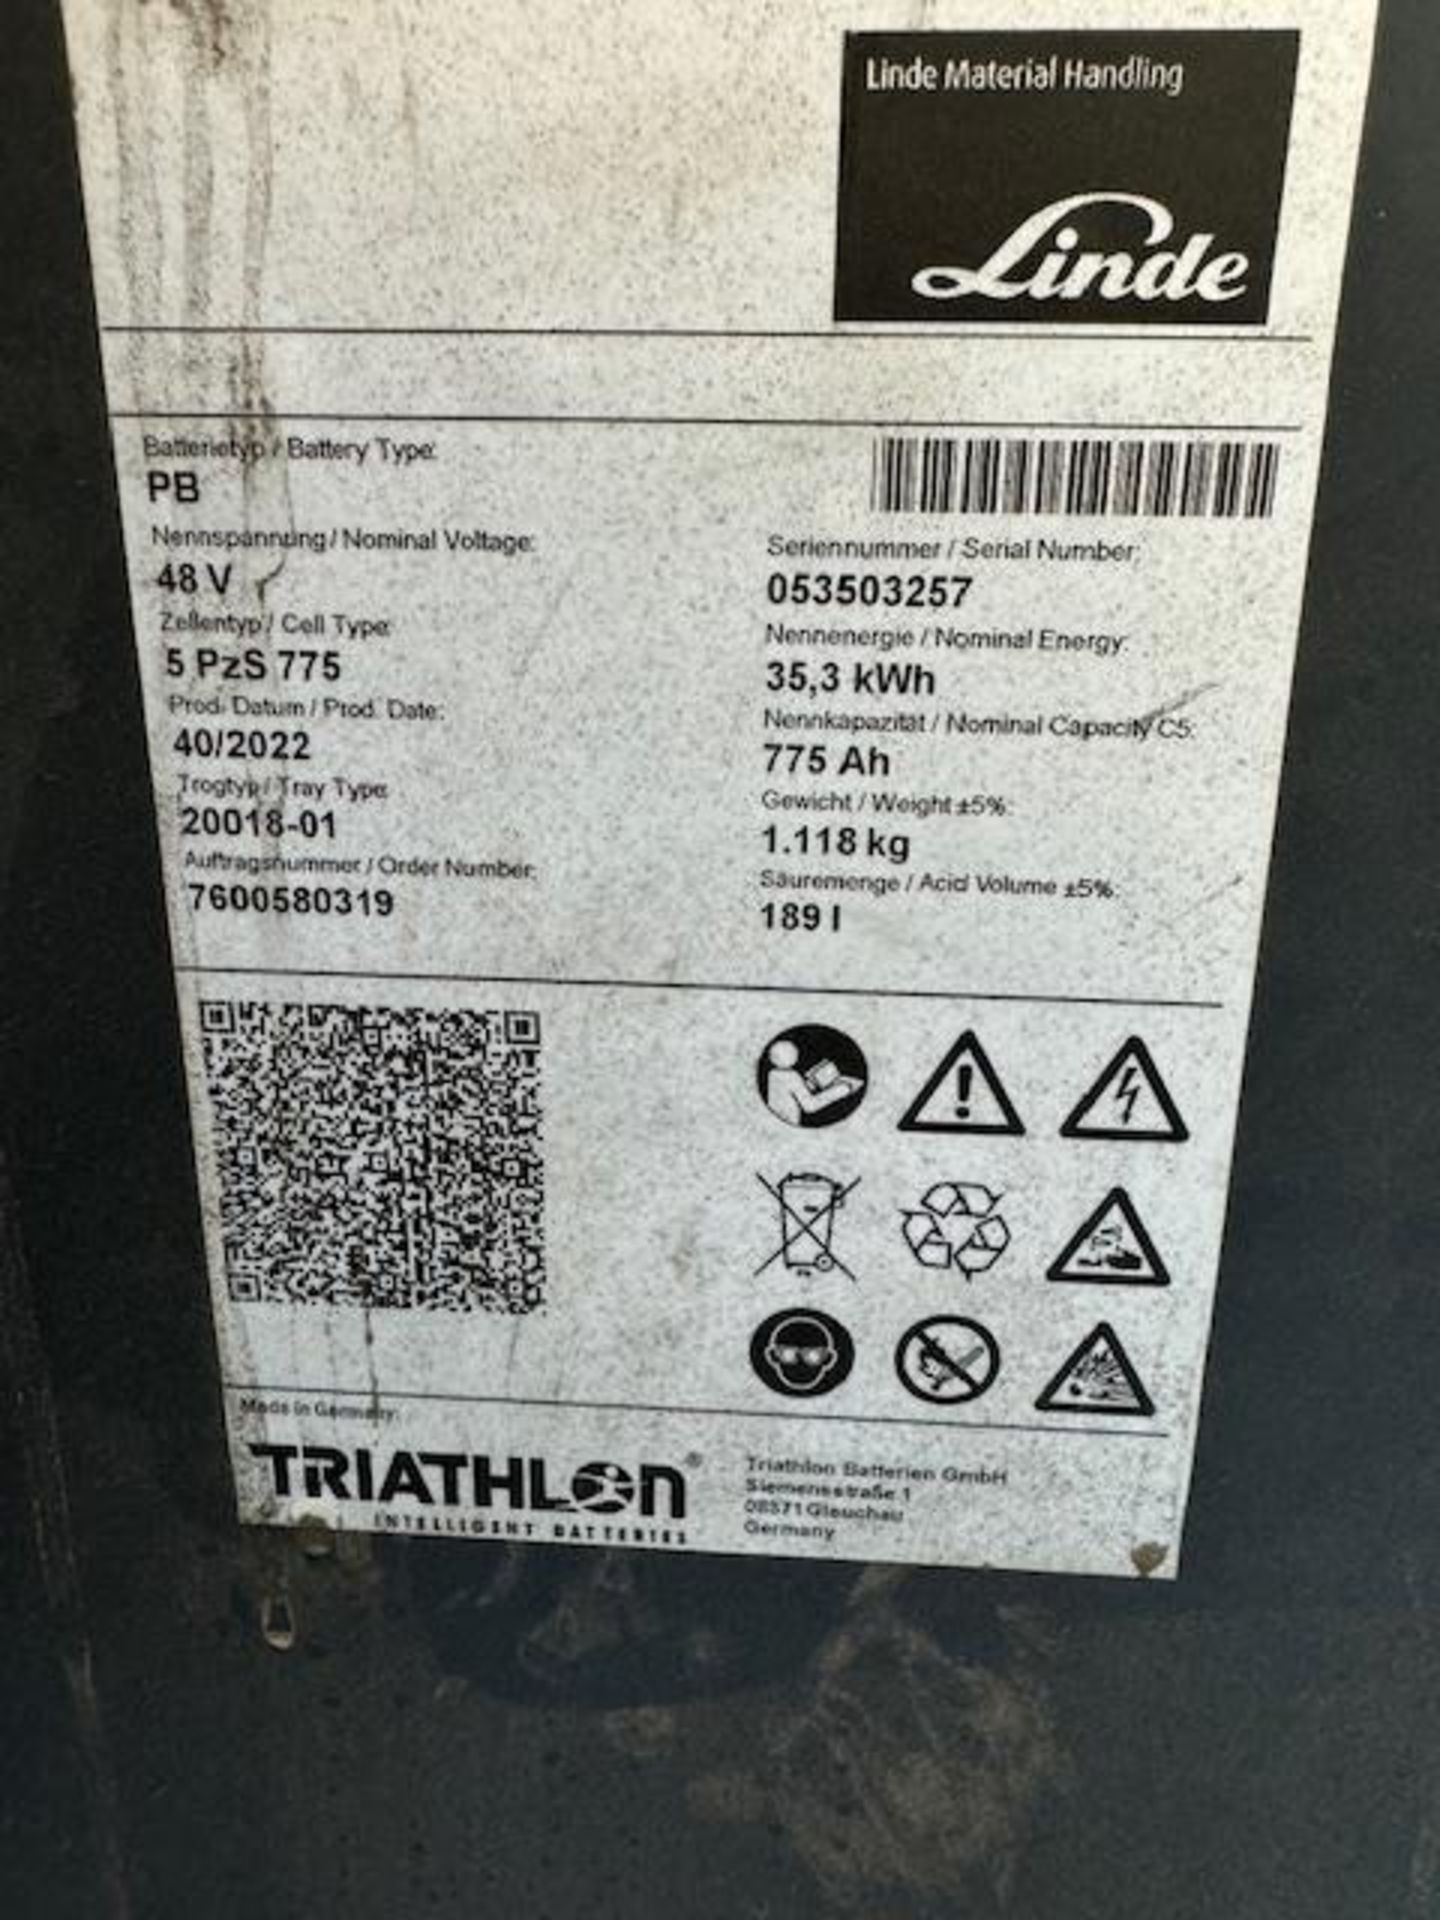 Linde spare battery pack for electric forklifts - Image 3 of 4